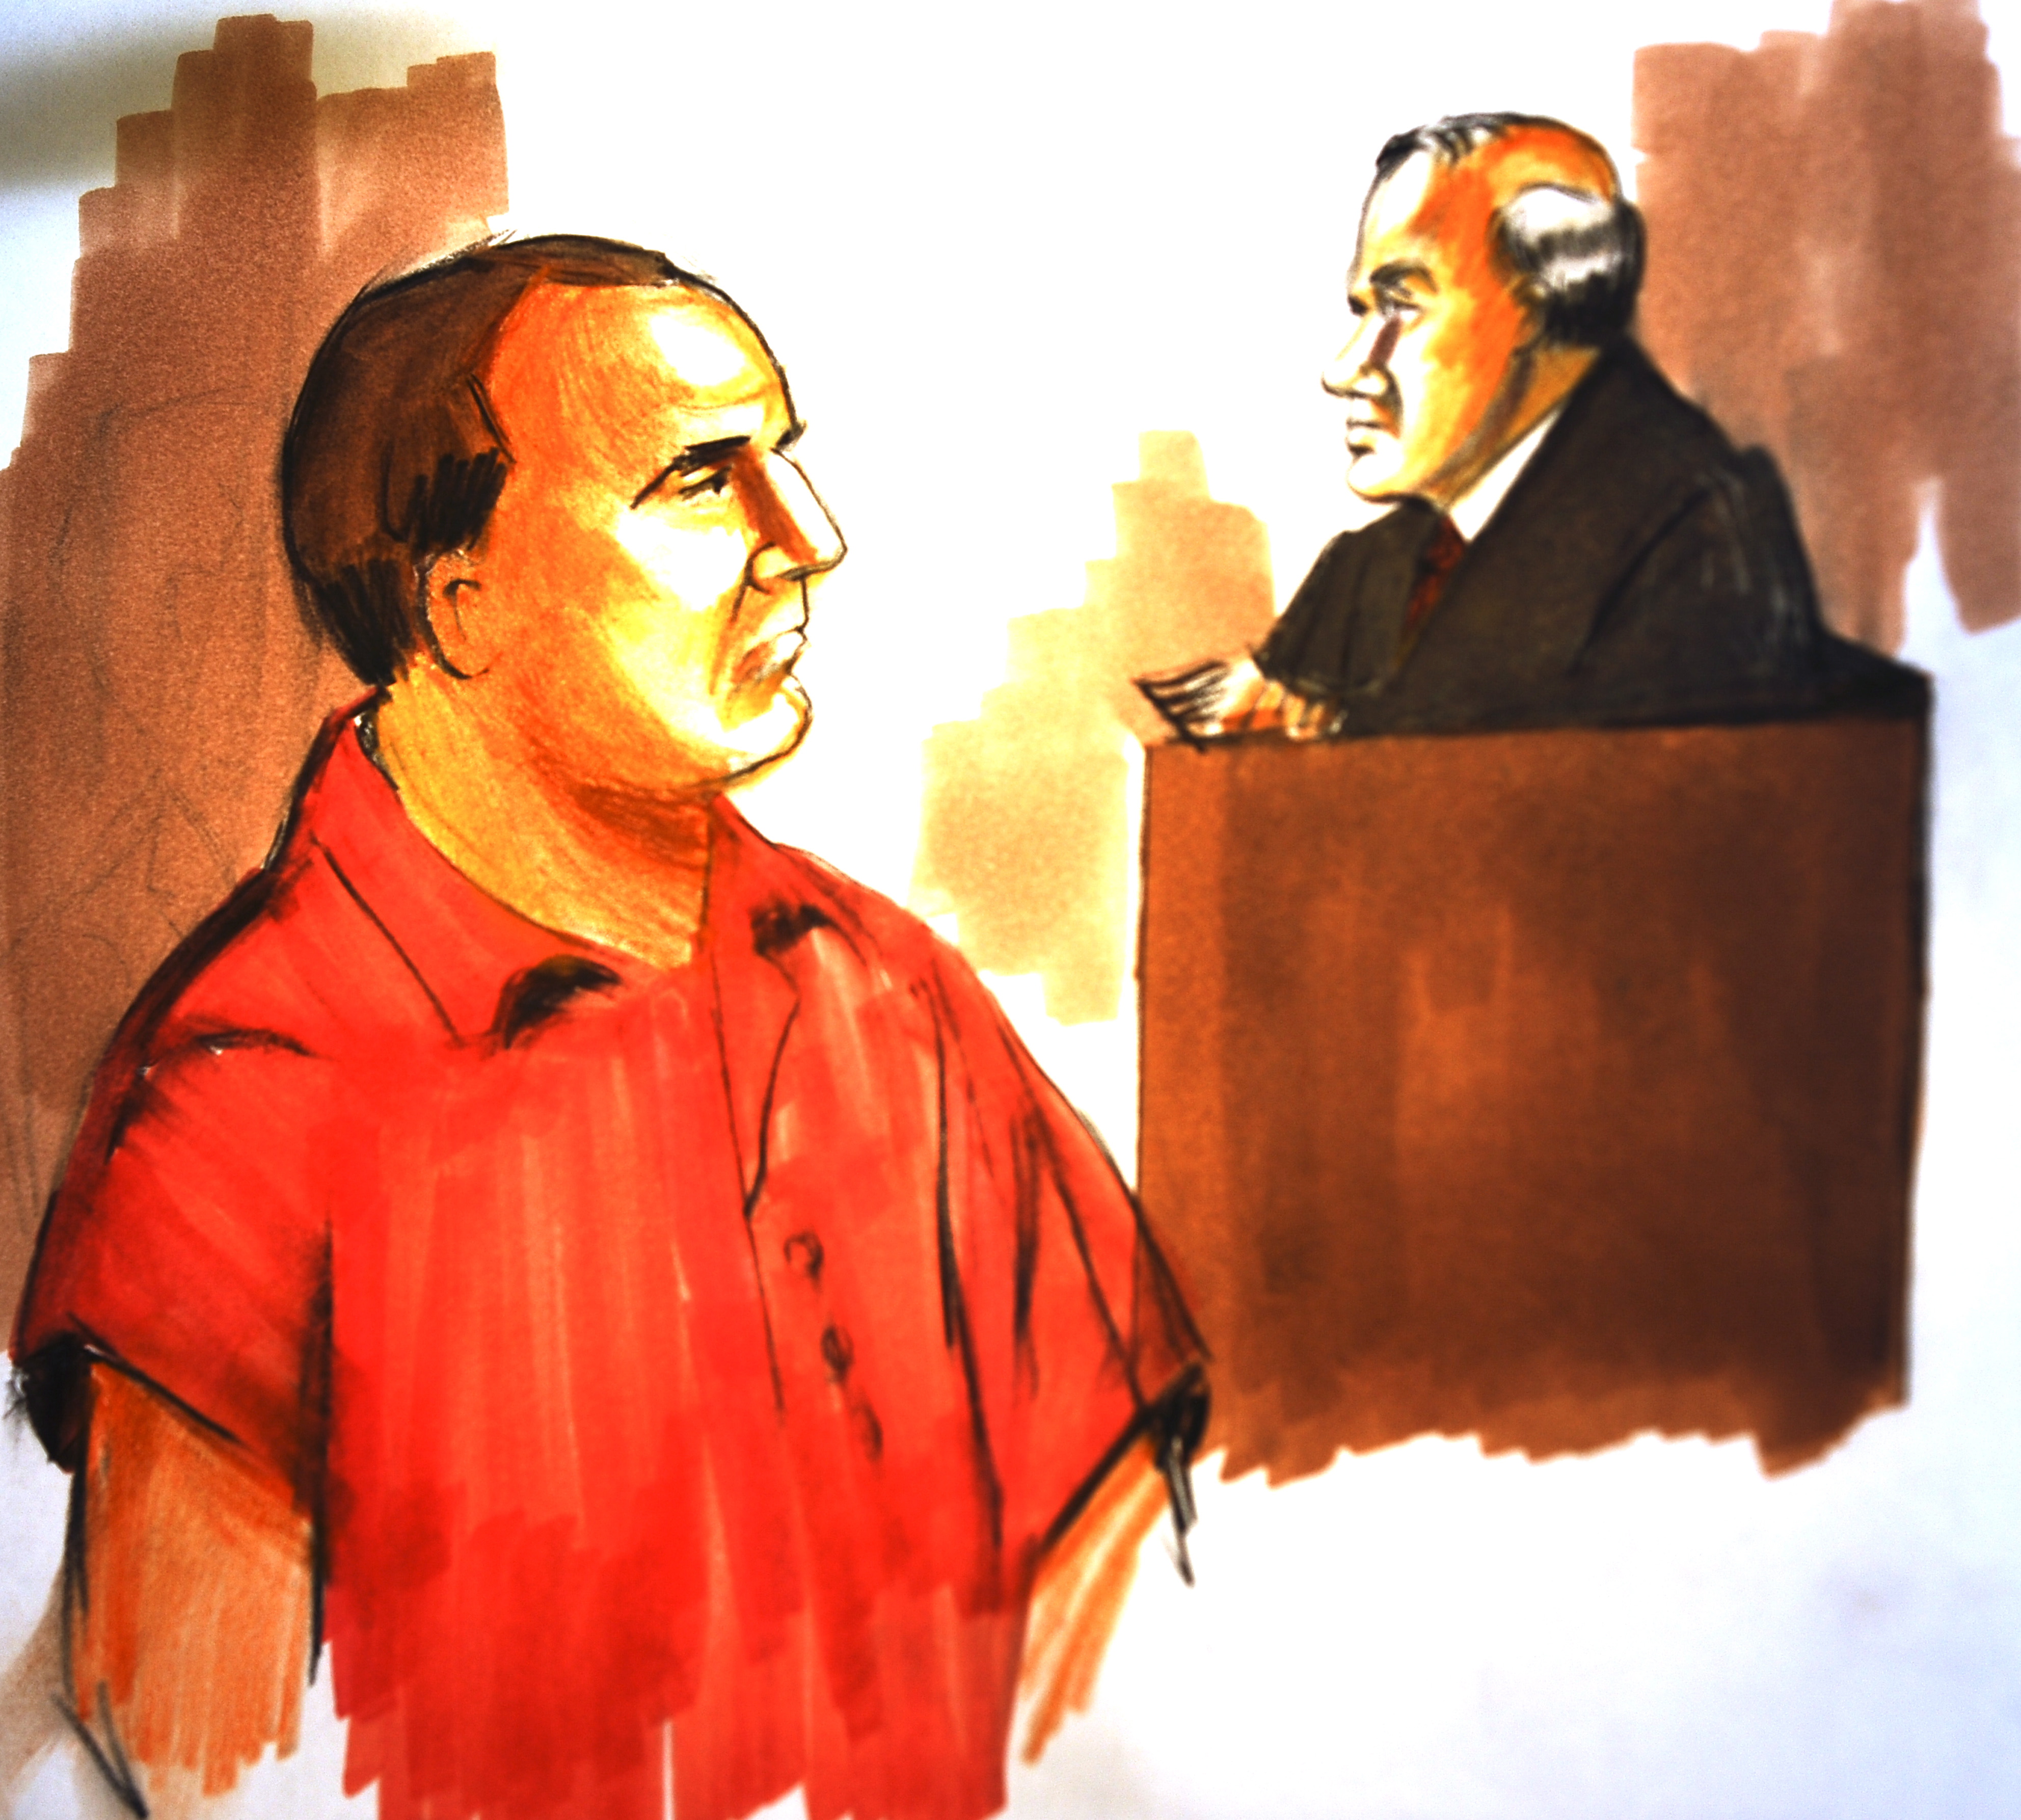 A courtroom drawing shows David Coleman Headley, left, as he appears before U.S. District Judge Harry Leinenweber in federal court for Headley's arraignment in Chicago in December 2009 (Verna Saddock—EPA)